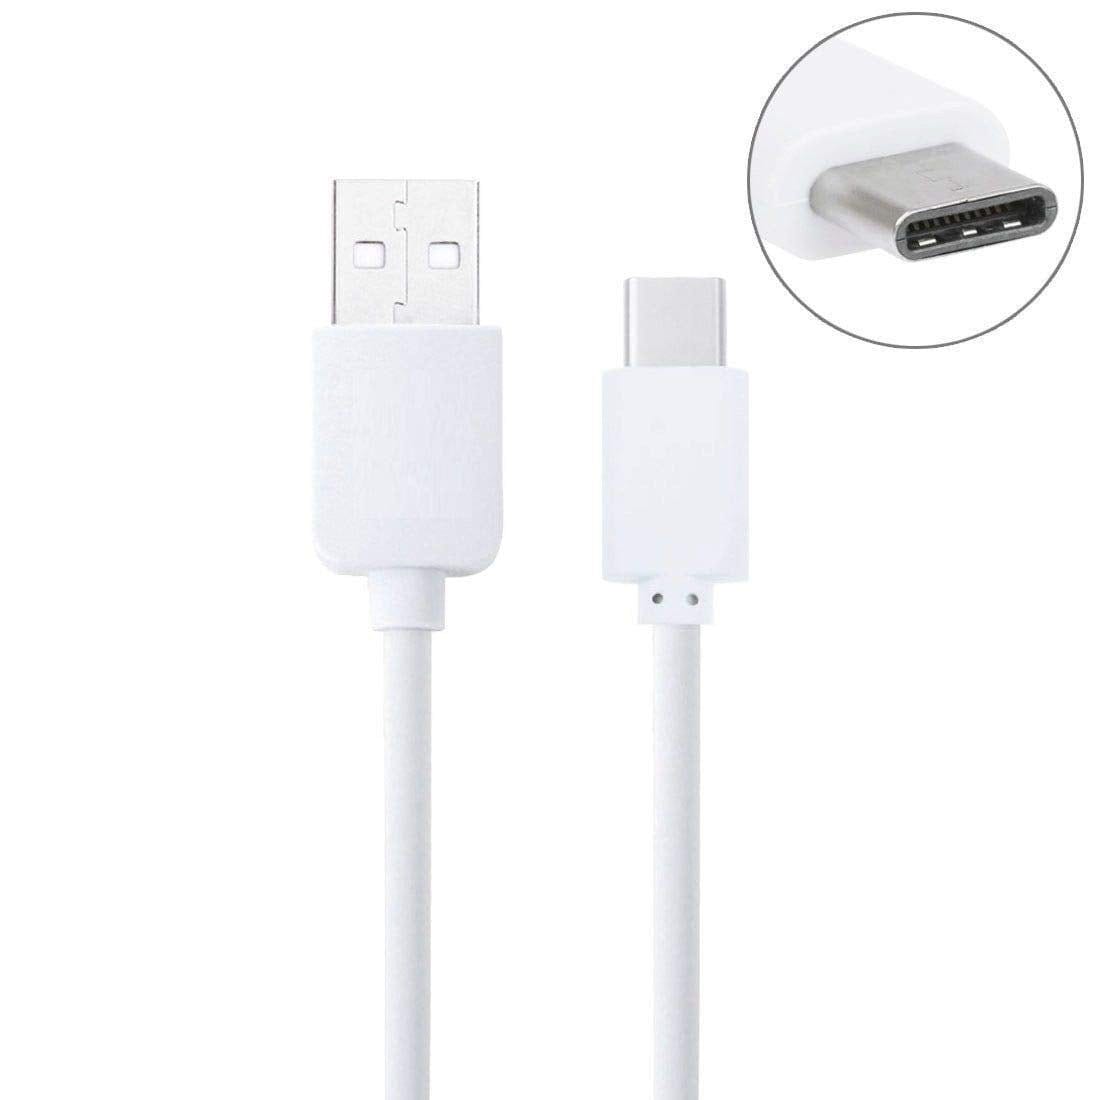 Samsung Galaxy A20e USB to Type C Charging Cable Lead White - 2M - SmartPhoneGadgetUK